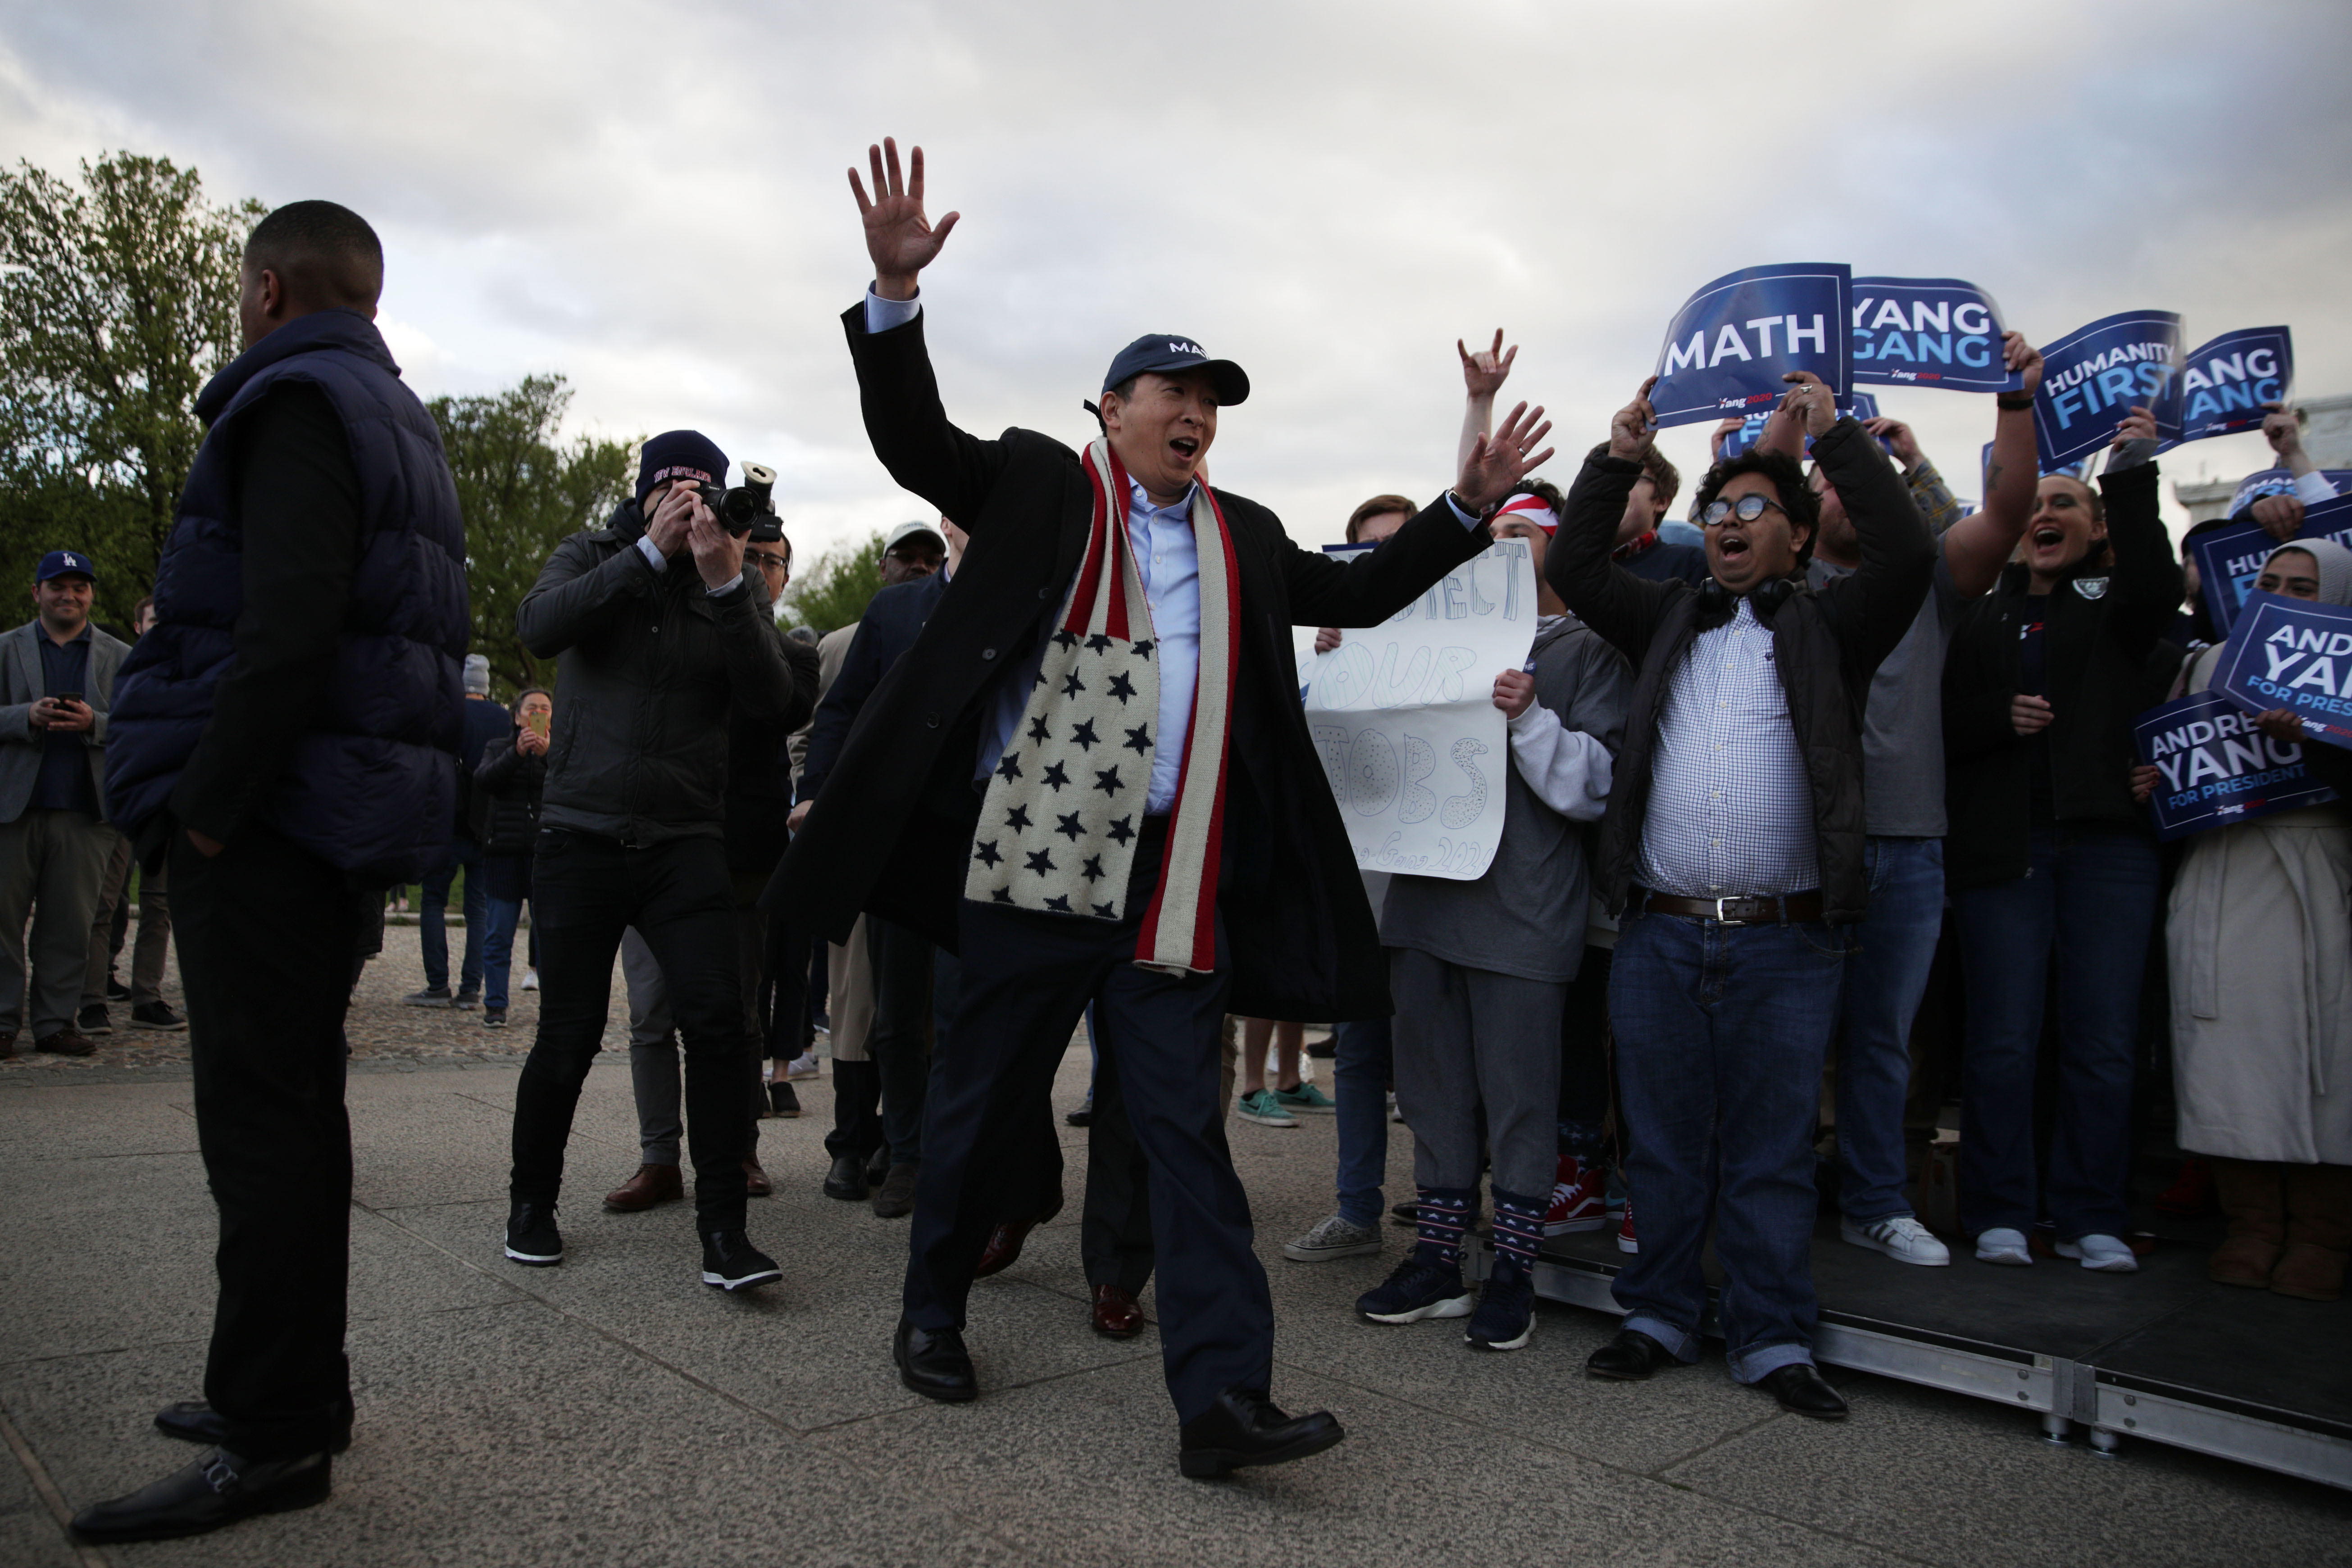 WASHINGTON, DC - APRIL 15: Democratic U.S. presidential hopeful Andrew Yang arrives at a campaign rally at the Lincoln Memorial April 15, 2019 in Washington, DC. One of Yang’s major campaign promises is a universal basic income proposal to give every American 18 years and older $1,000 every month. (Photo by Alex Wong/Getty Images)